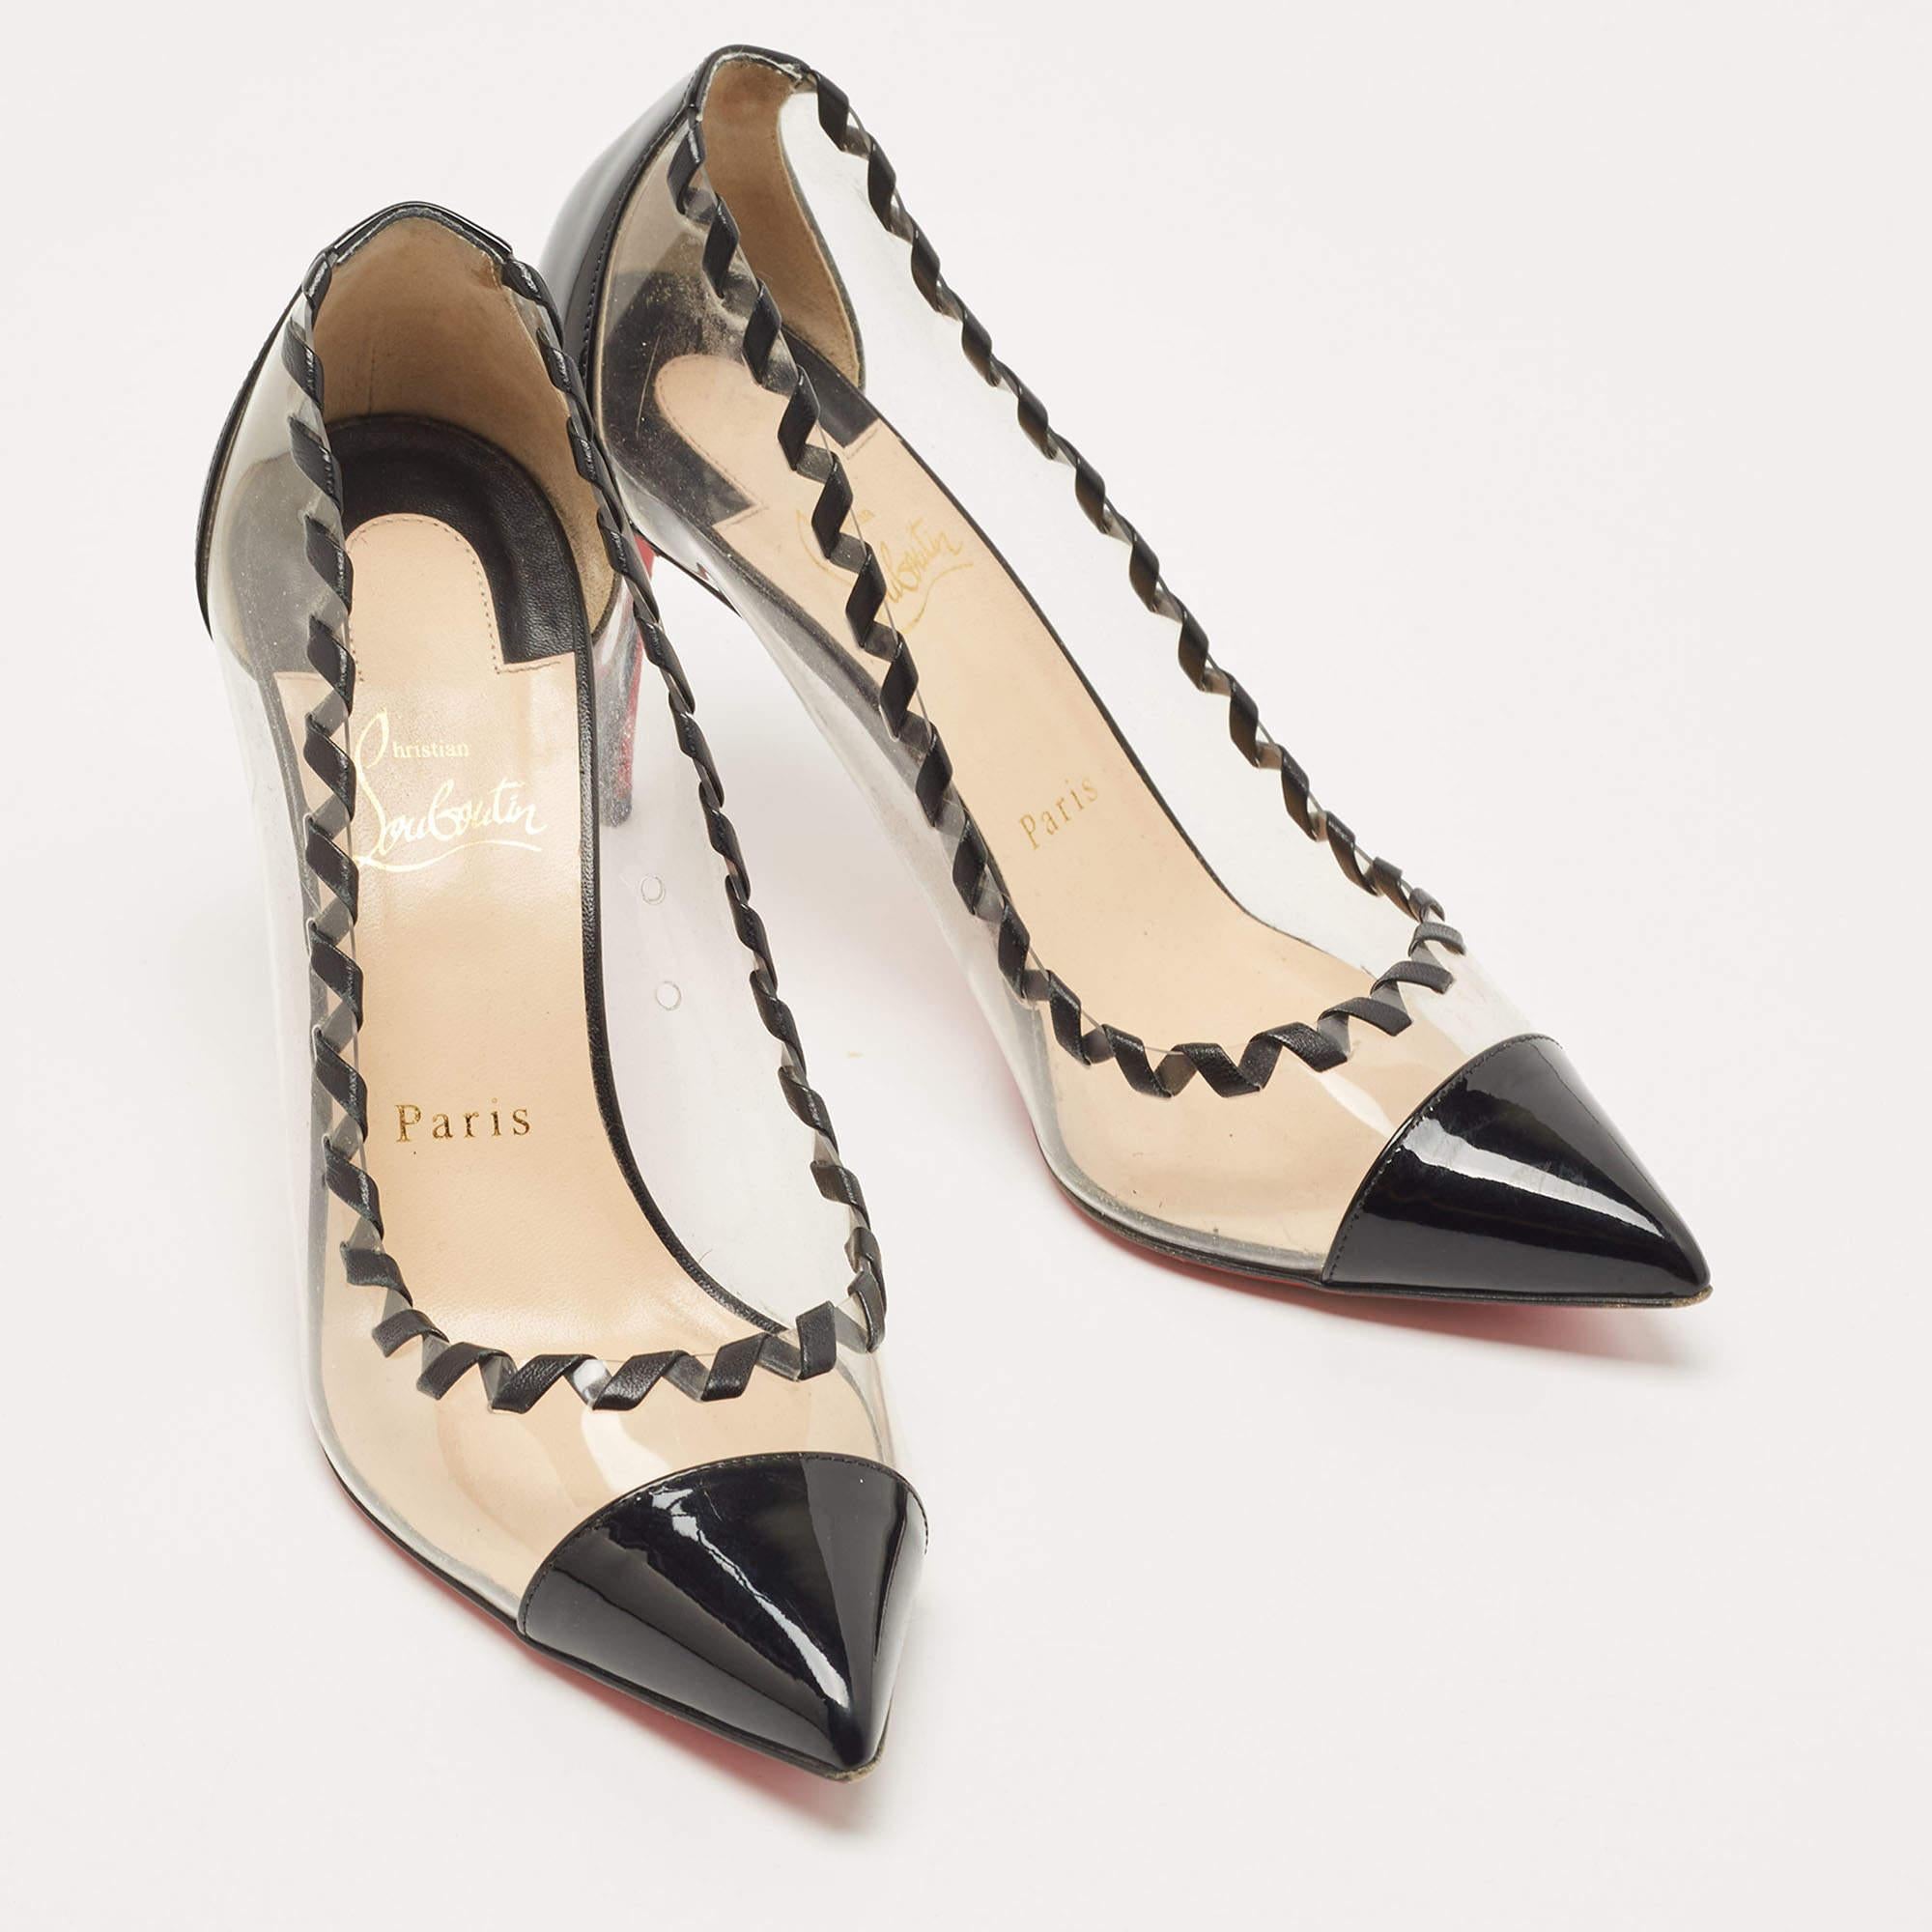 Women's Christian Louboutin Black PVC and Patent Leather Lizabeth Pointed Toe Pumps Size